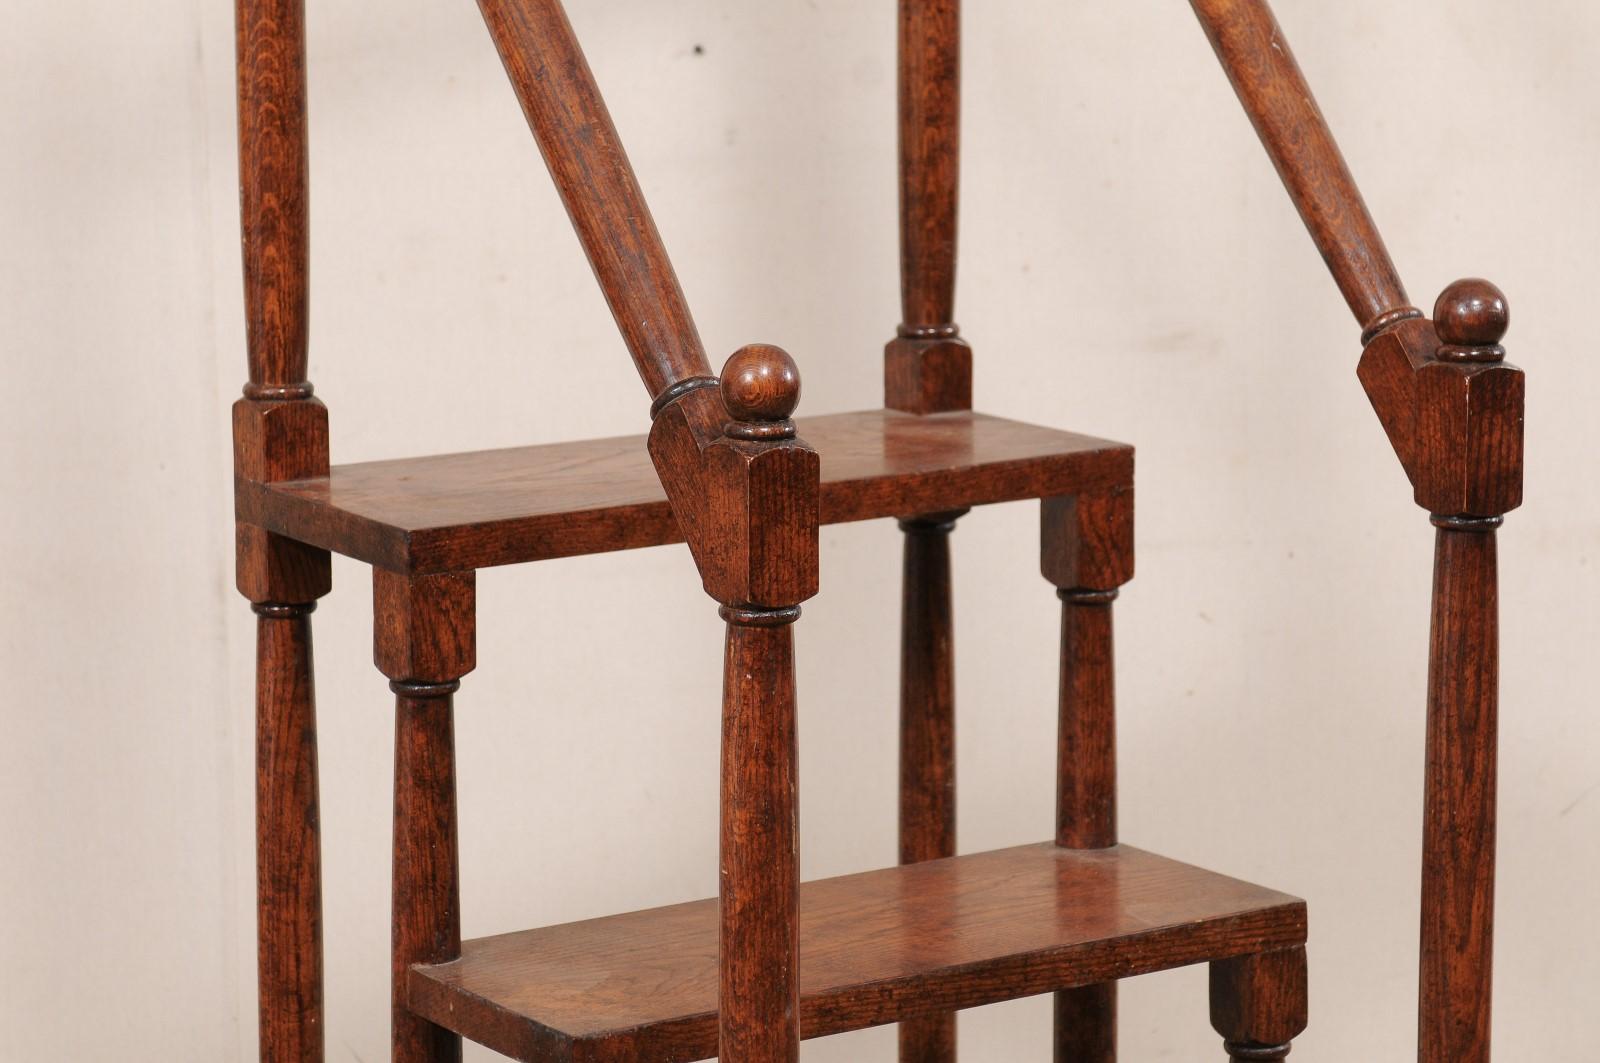 English Carved-Wood Library Step Ladder Would Also Be a Great Kitchen Piece 2